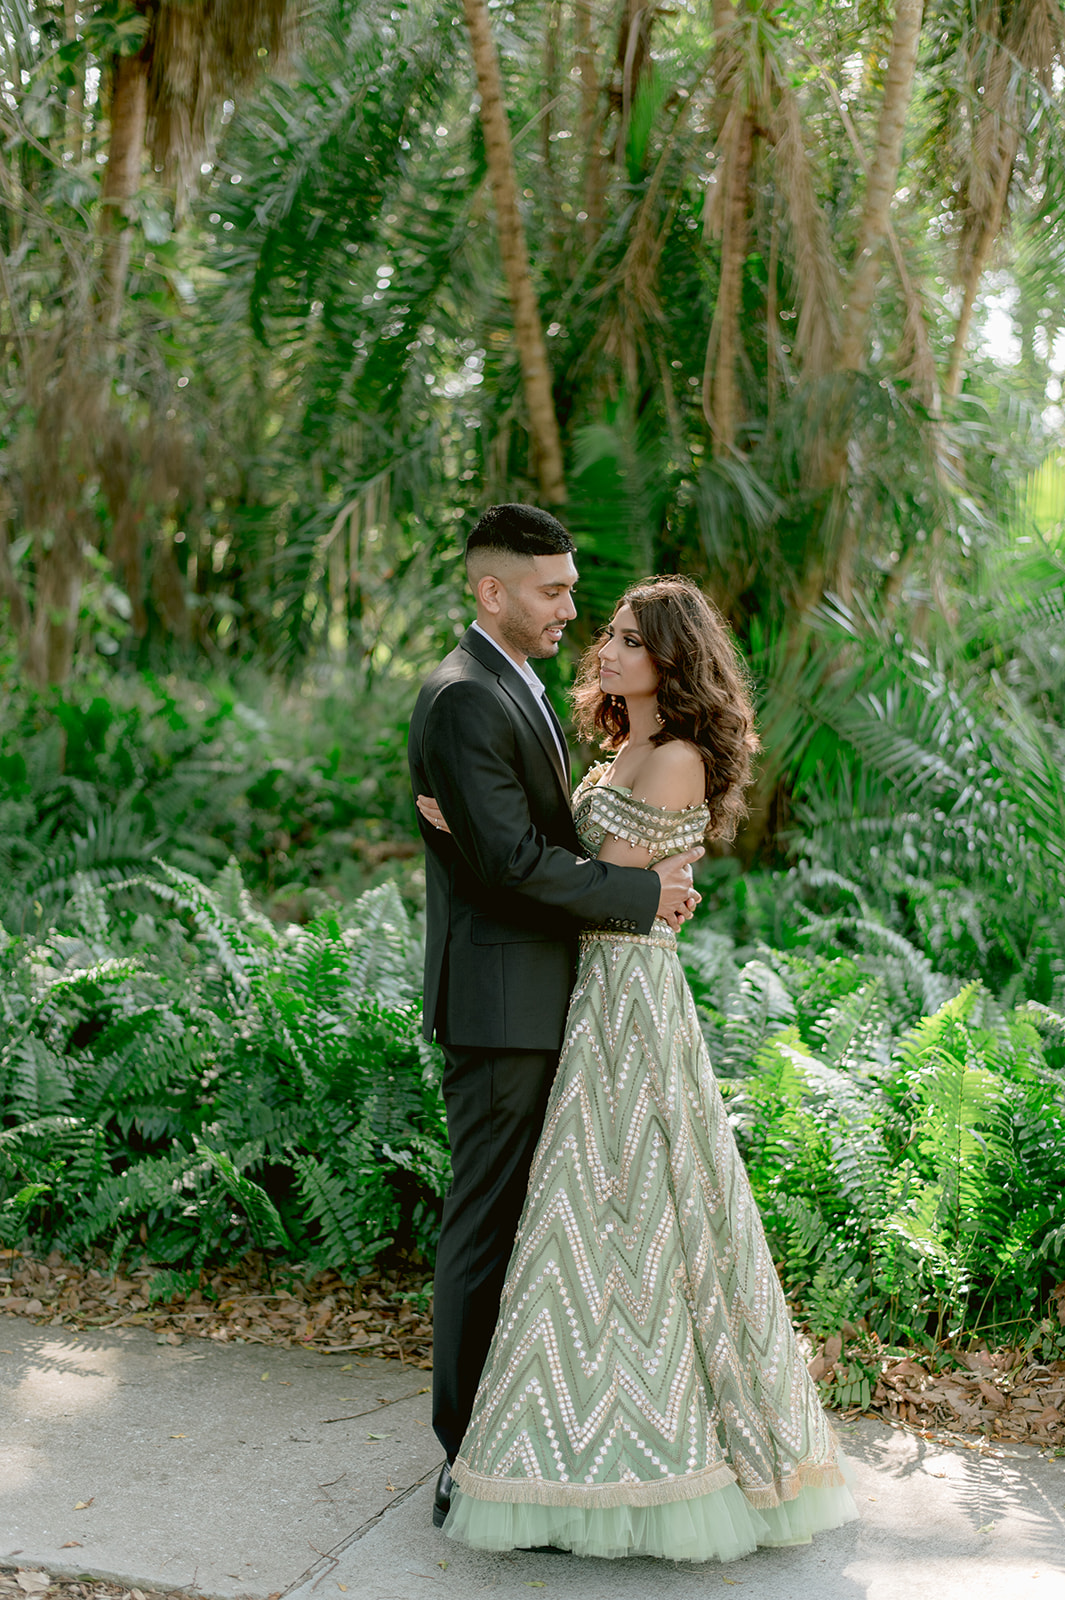 "Indian bride and groom in love during their engagement session at the Ringling Museum"
